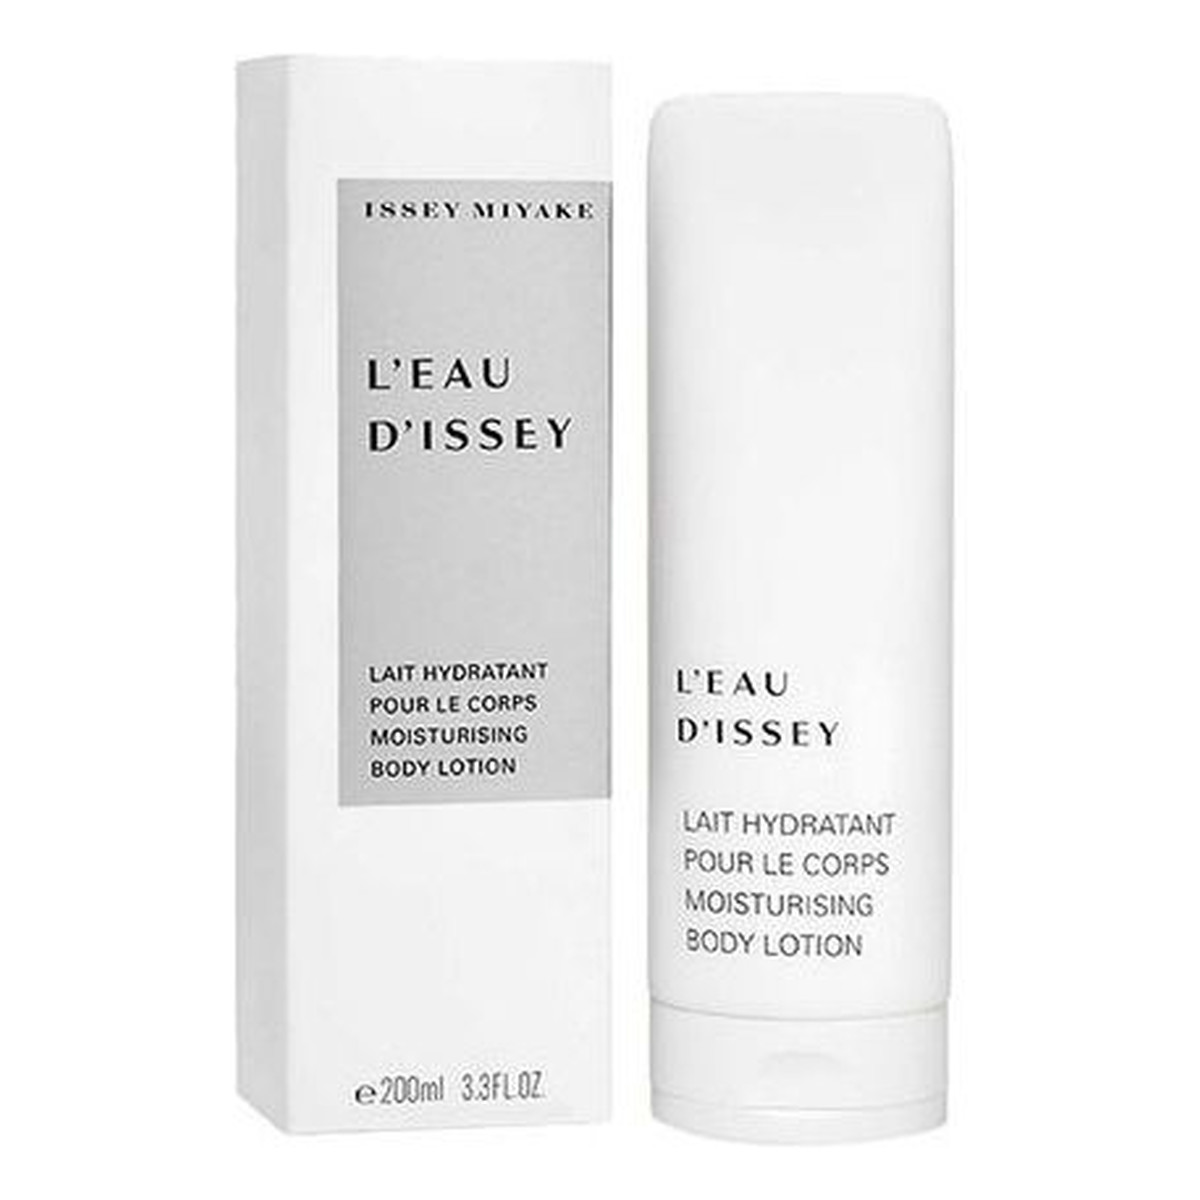 Issey Miyake L'Eau d'Issey Pour Femme BODY LOTION 200ml